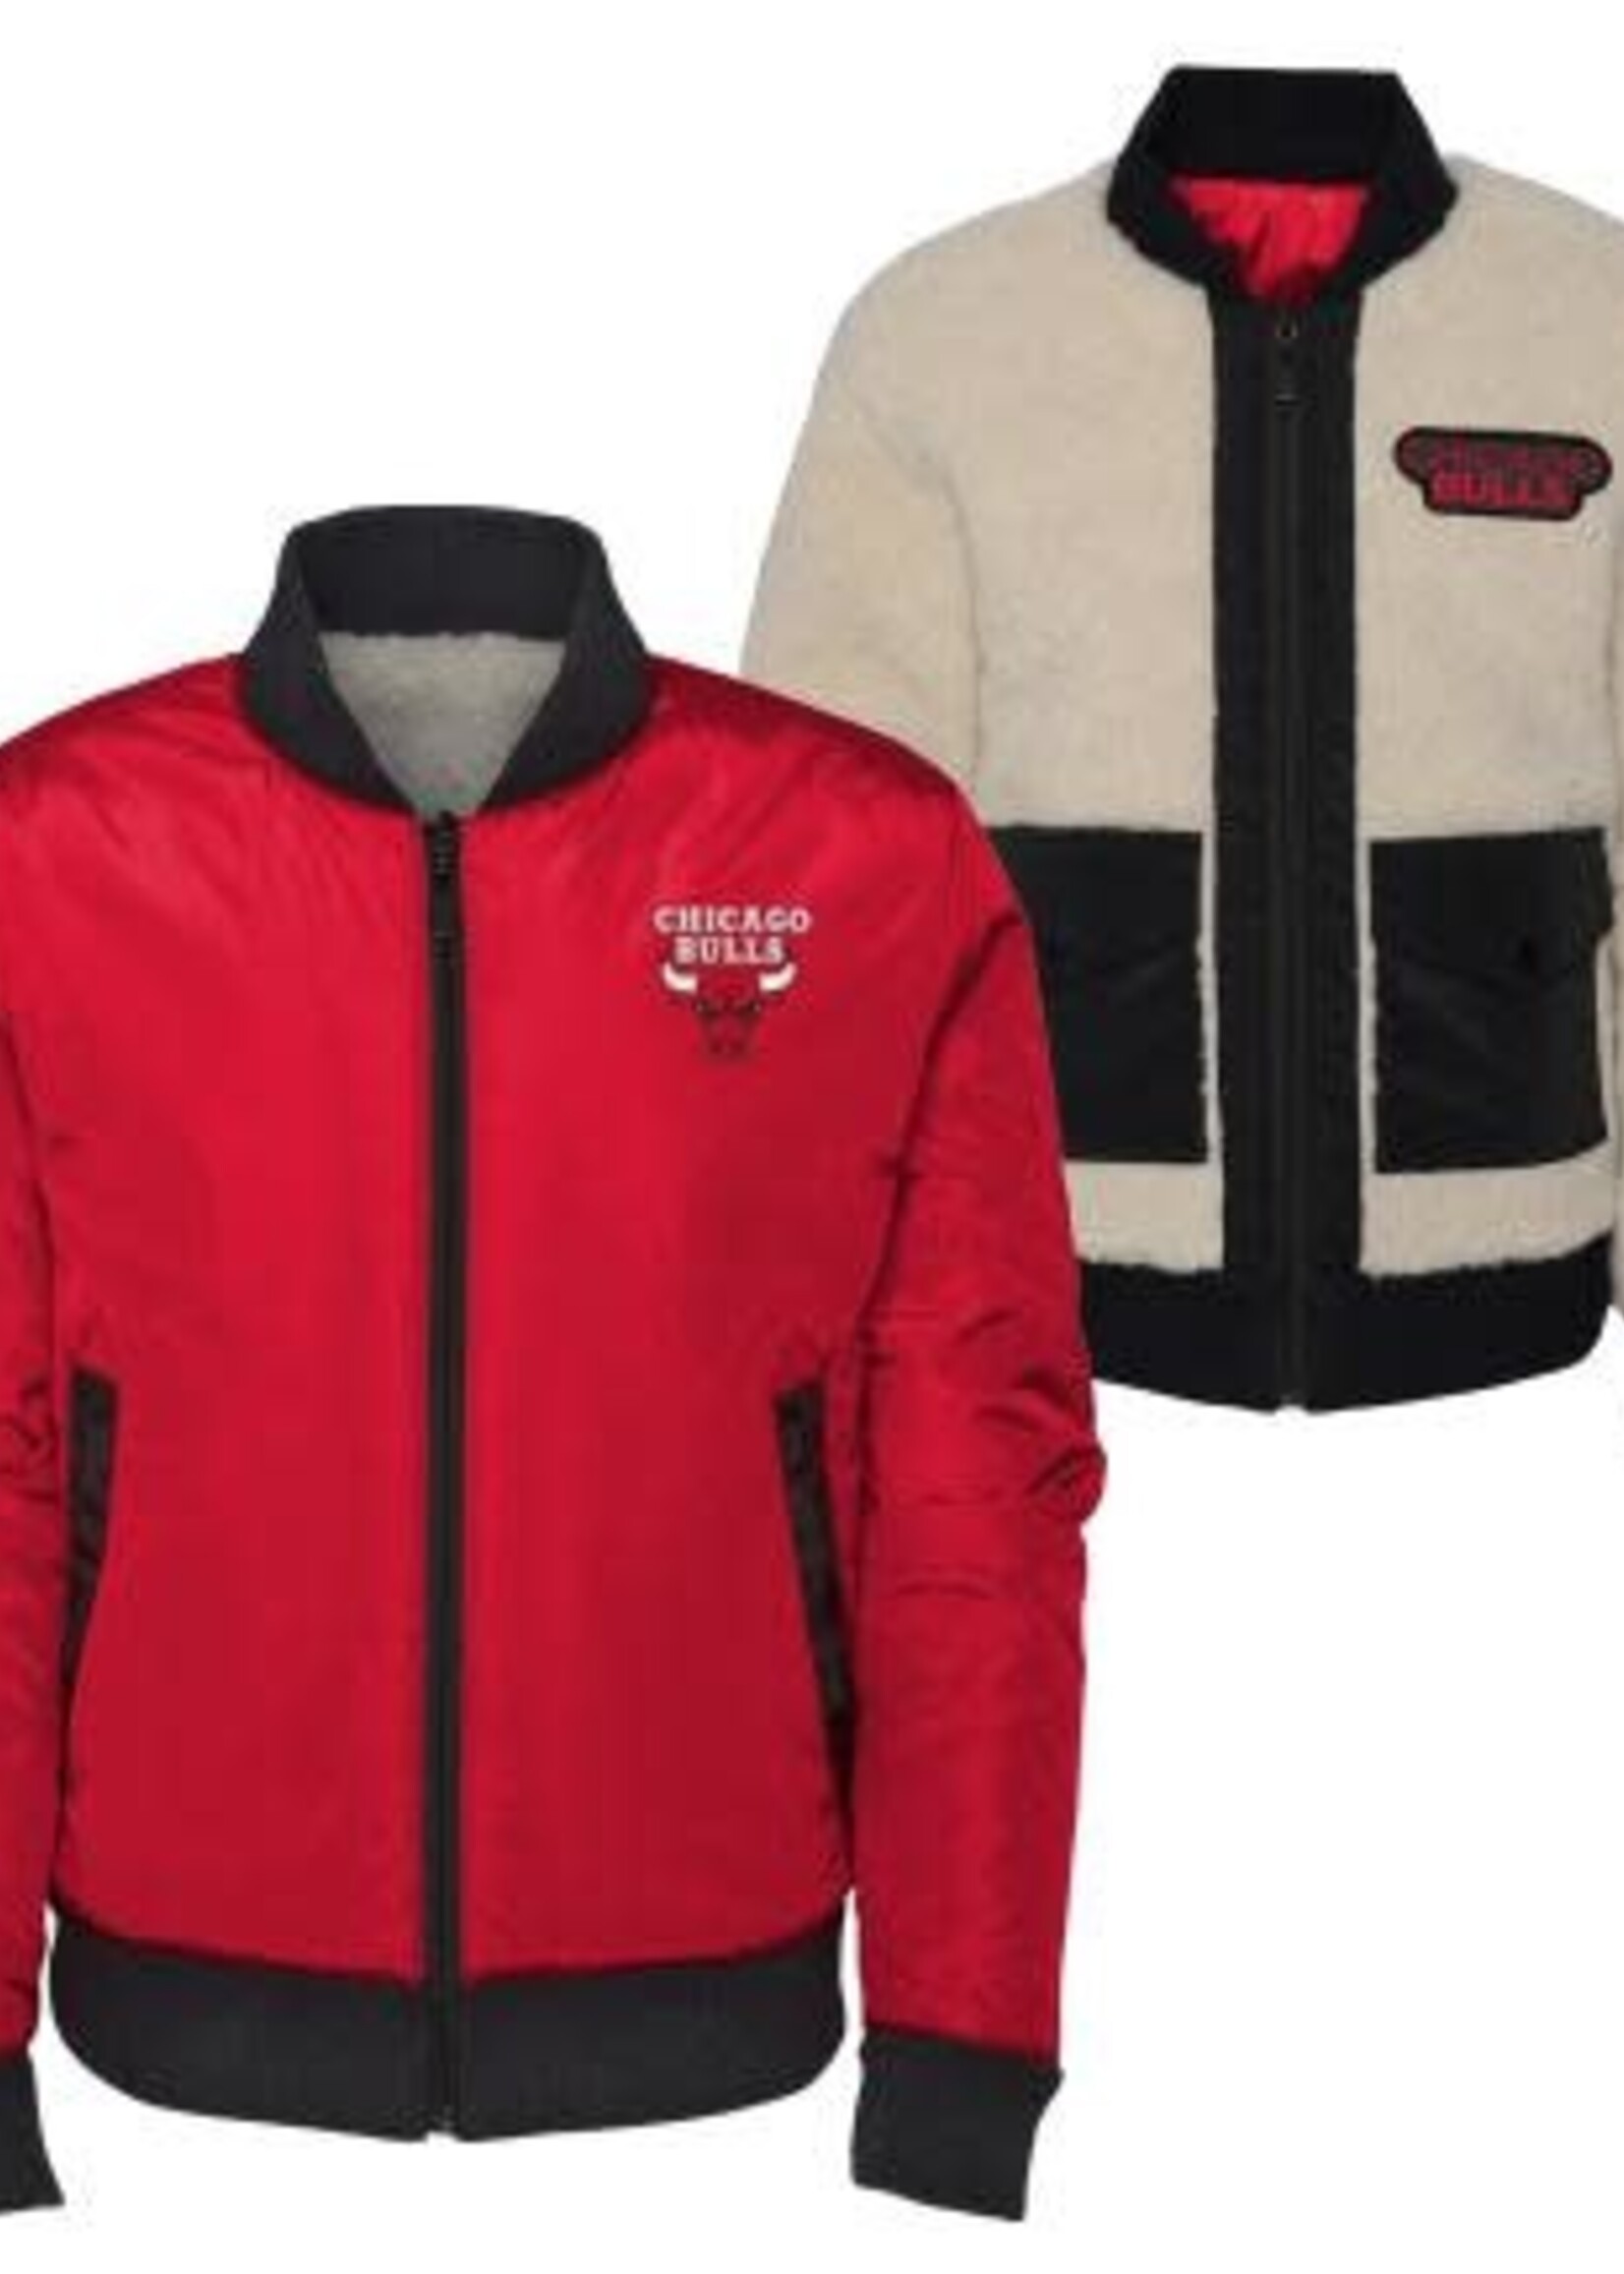 Mitchell & Ness NBA Chicago Bulls Youth Reversible Bomber Rood Wit